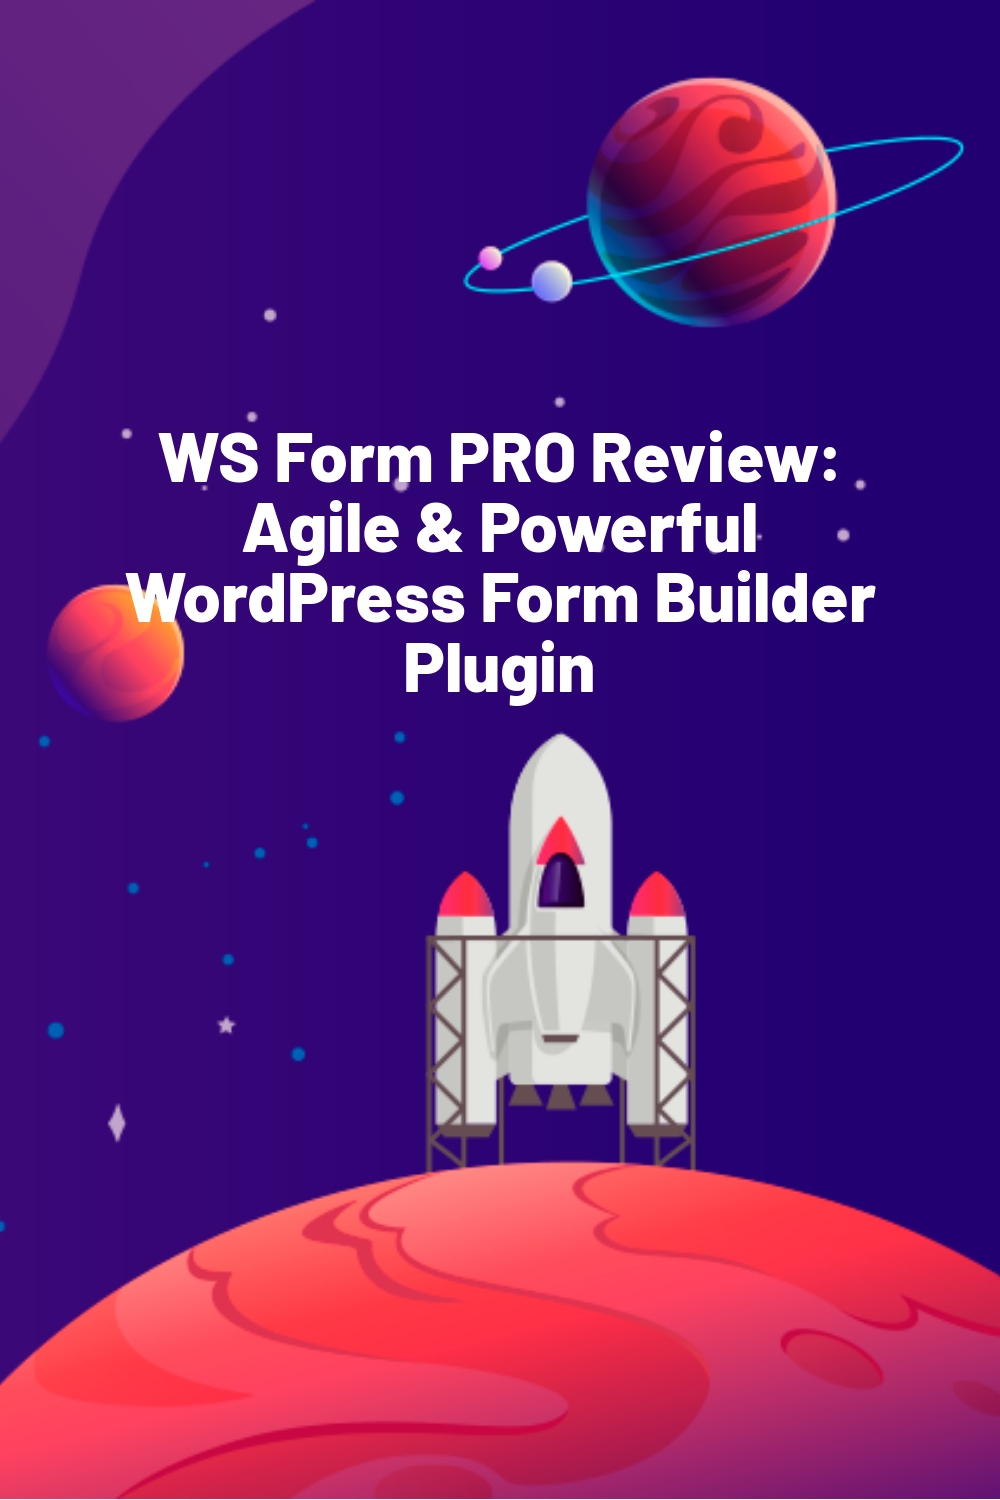 WS Form PRO Review: Agile & Powerful WordPress Form Builder Plugin